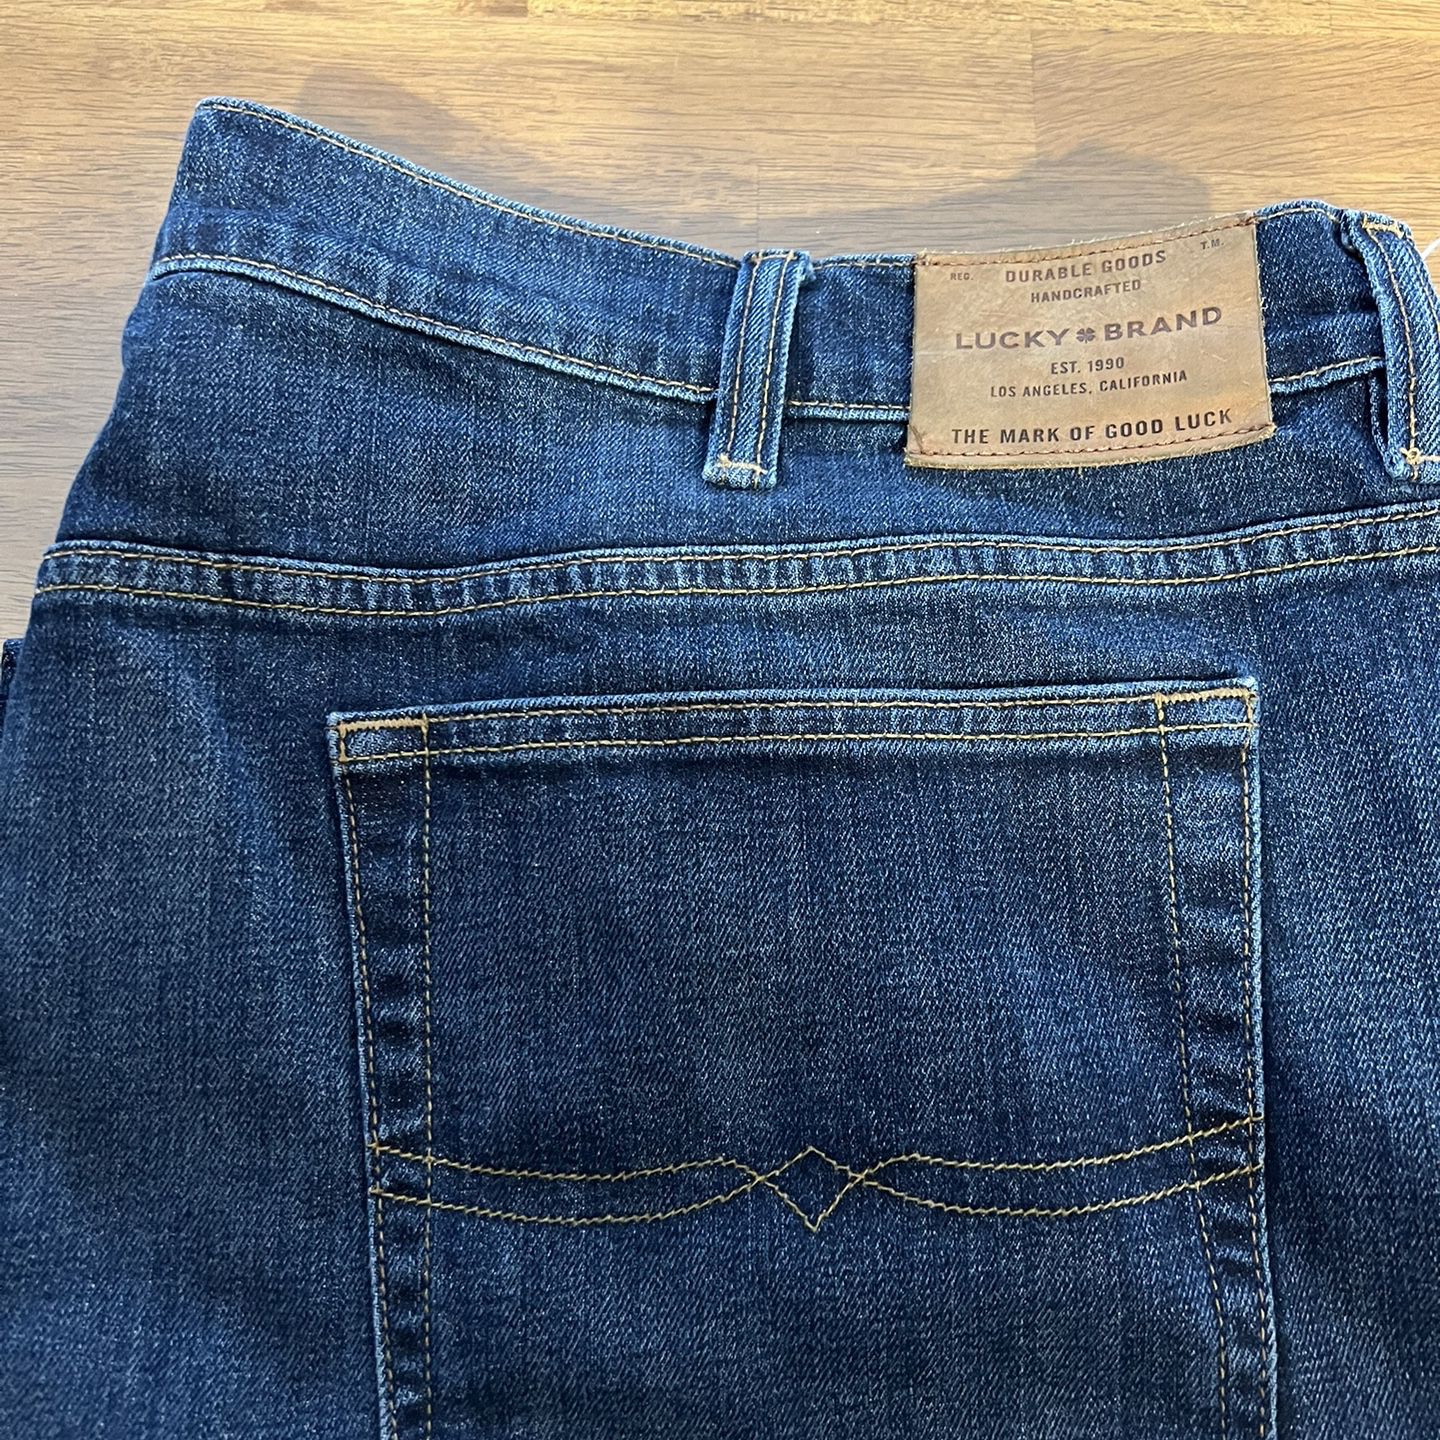 New and Used Levis for Sale in Bakersfield, CA - OfferUp